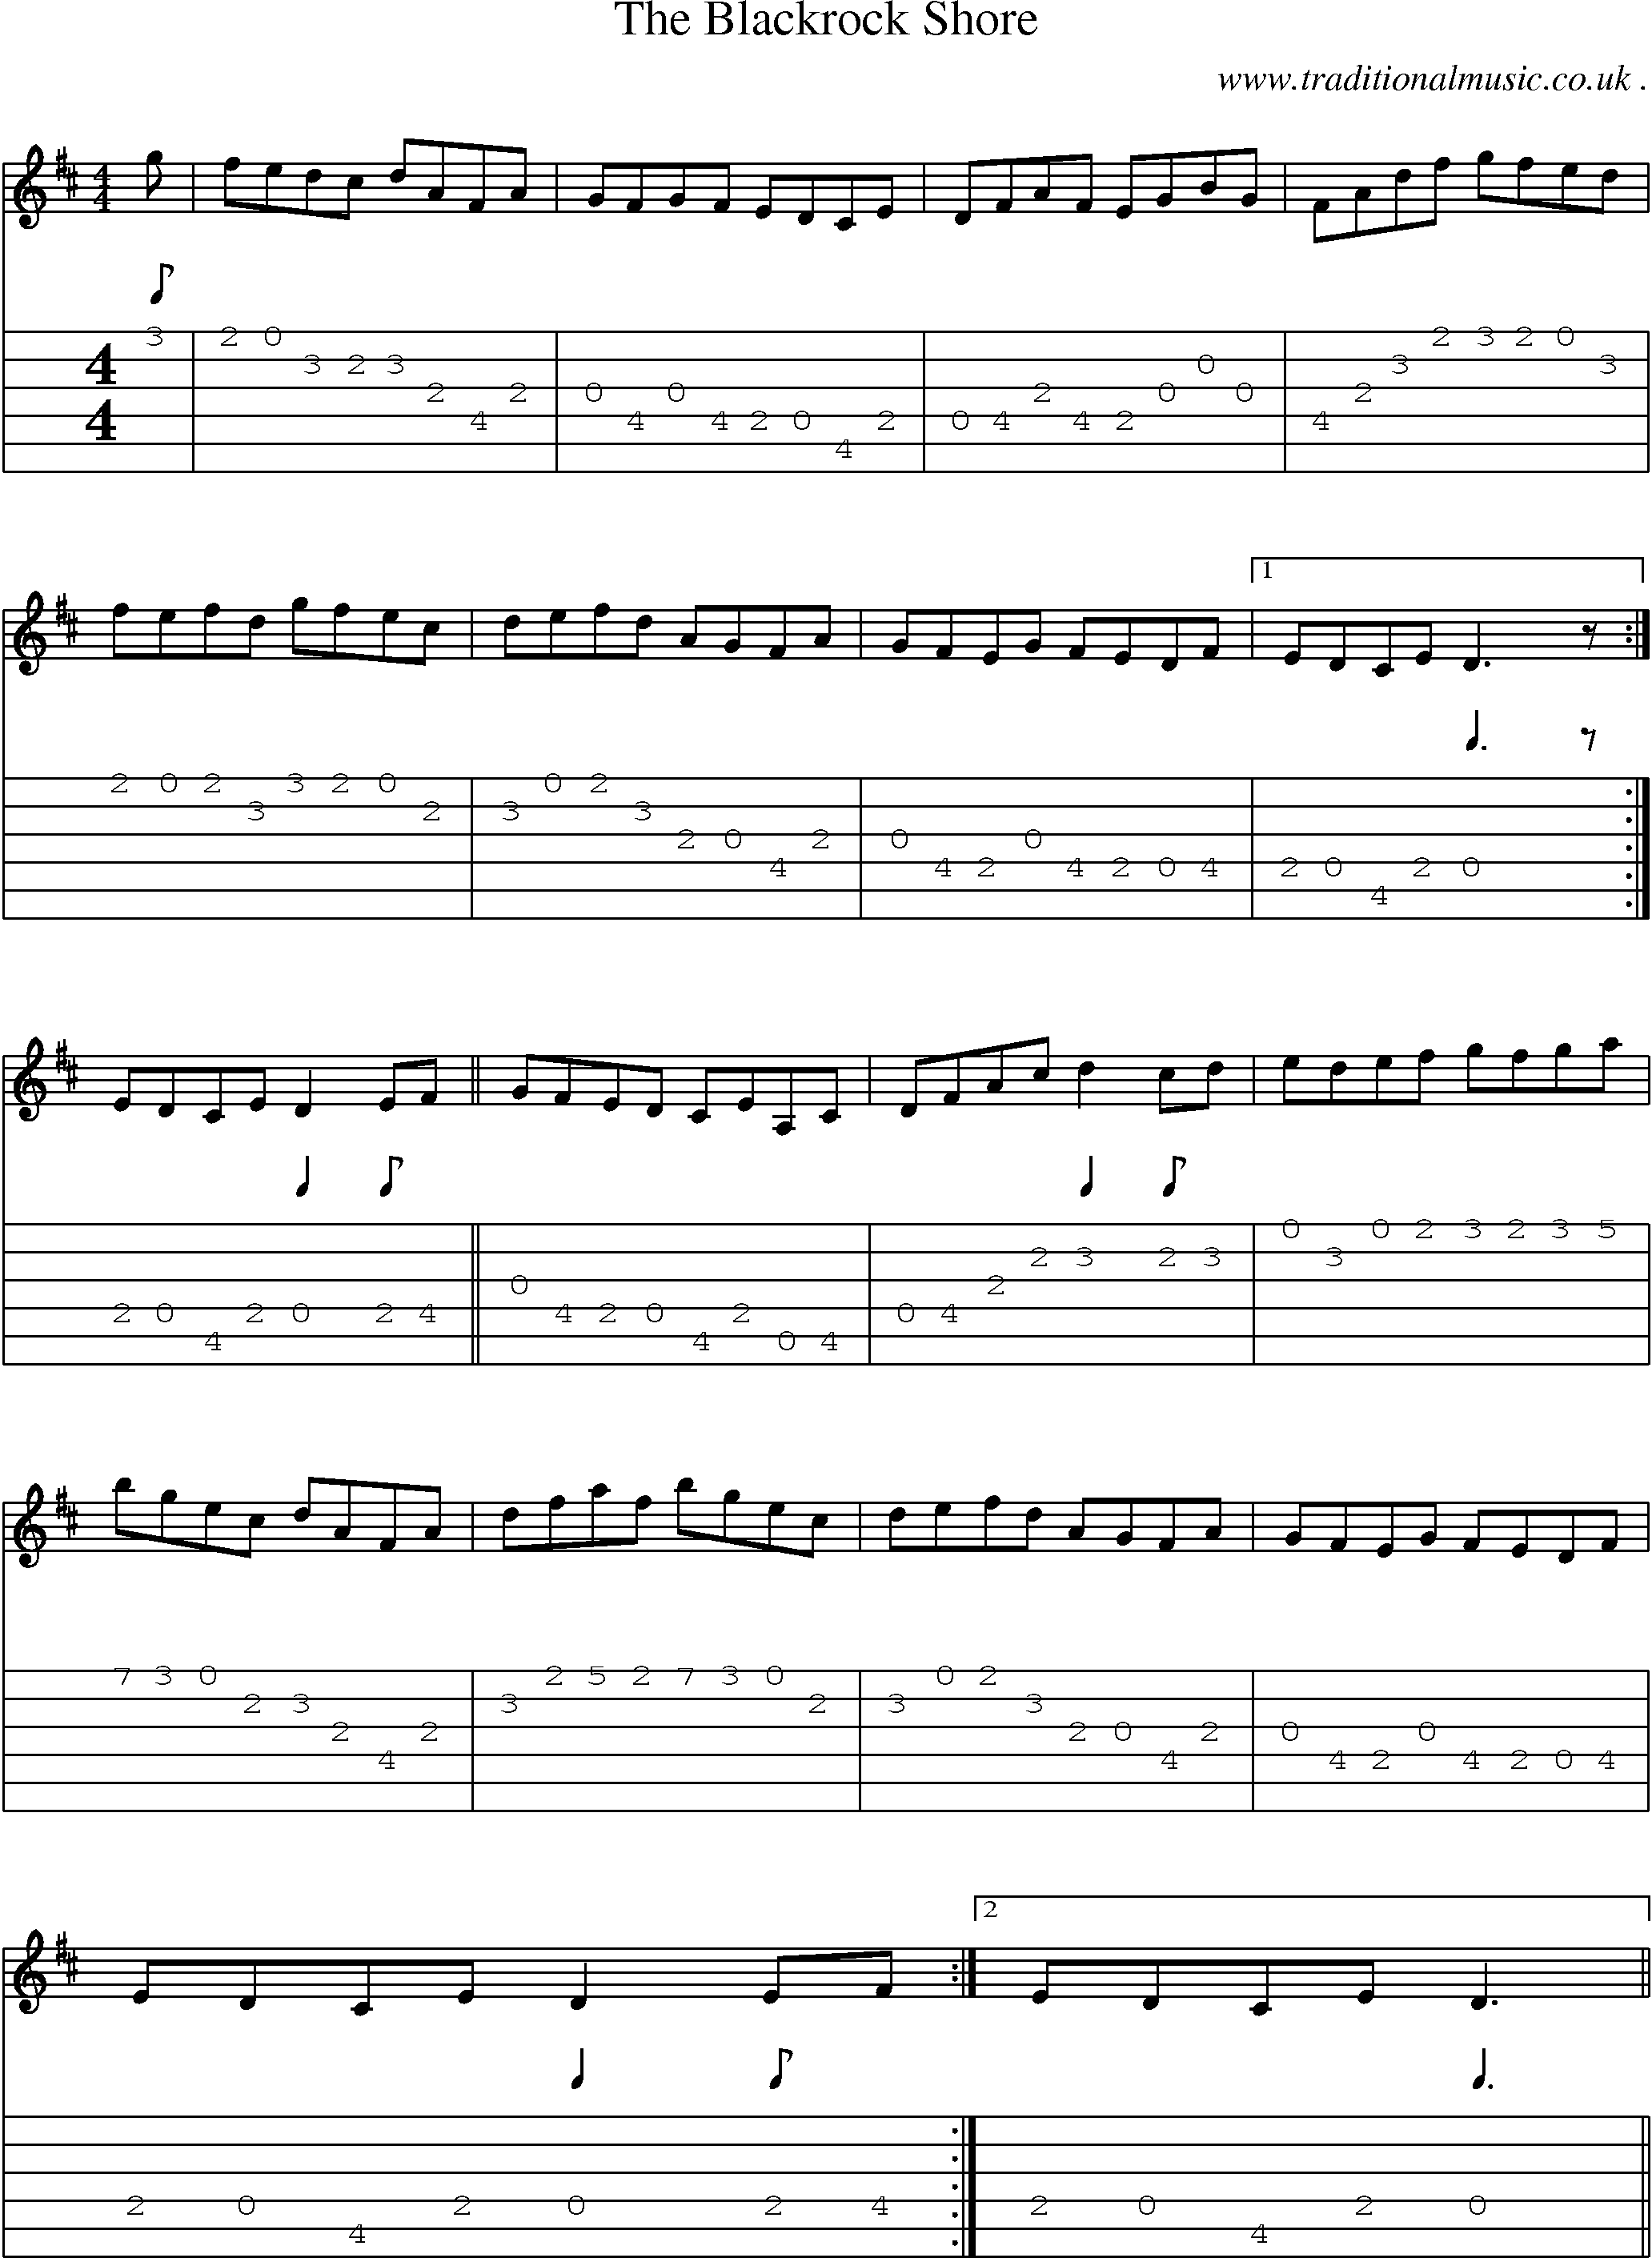 Sheet-Music and Guitar Tabs for The Blackrock Shore